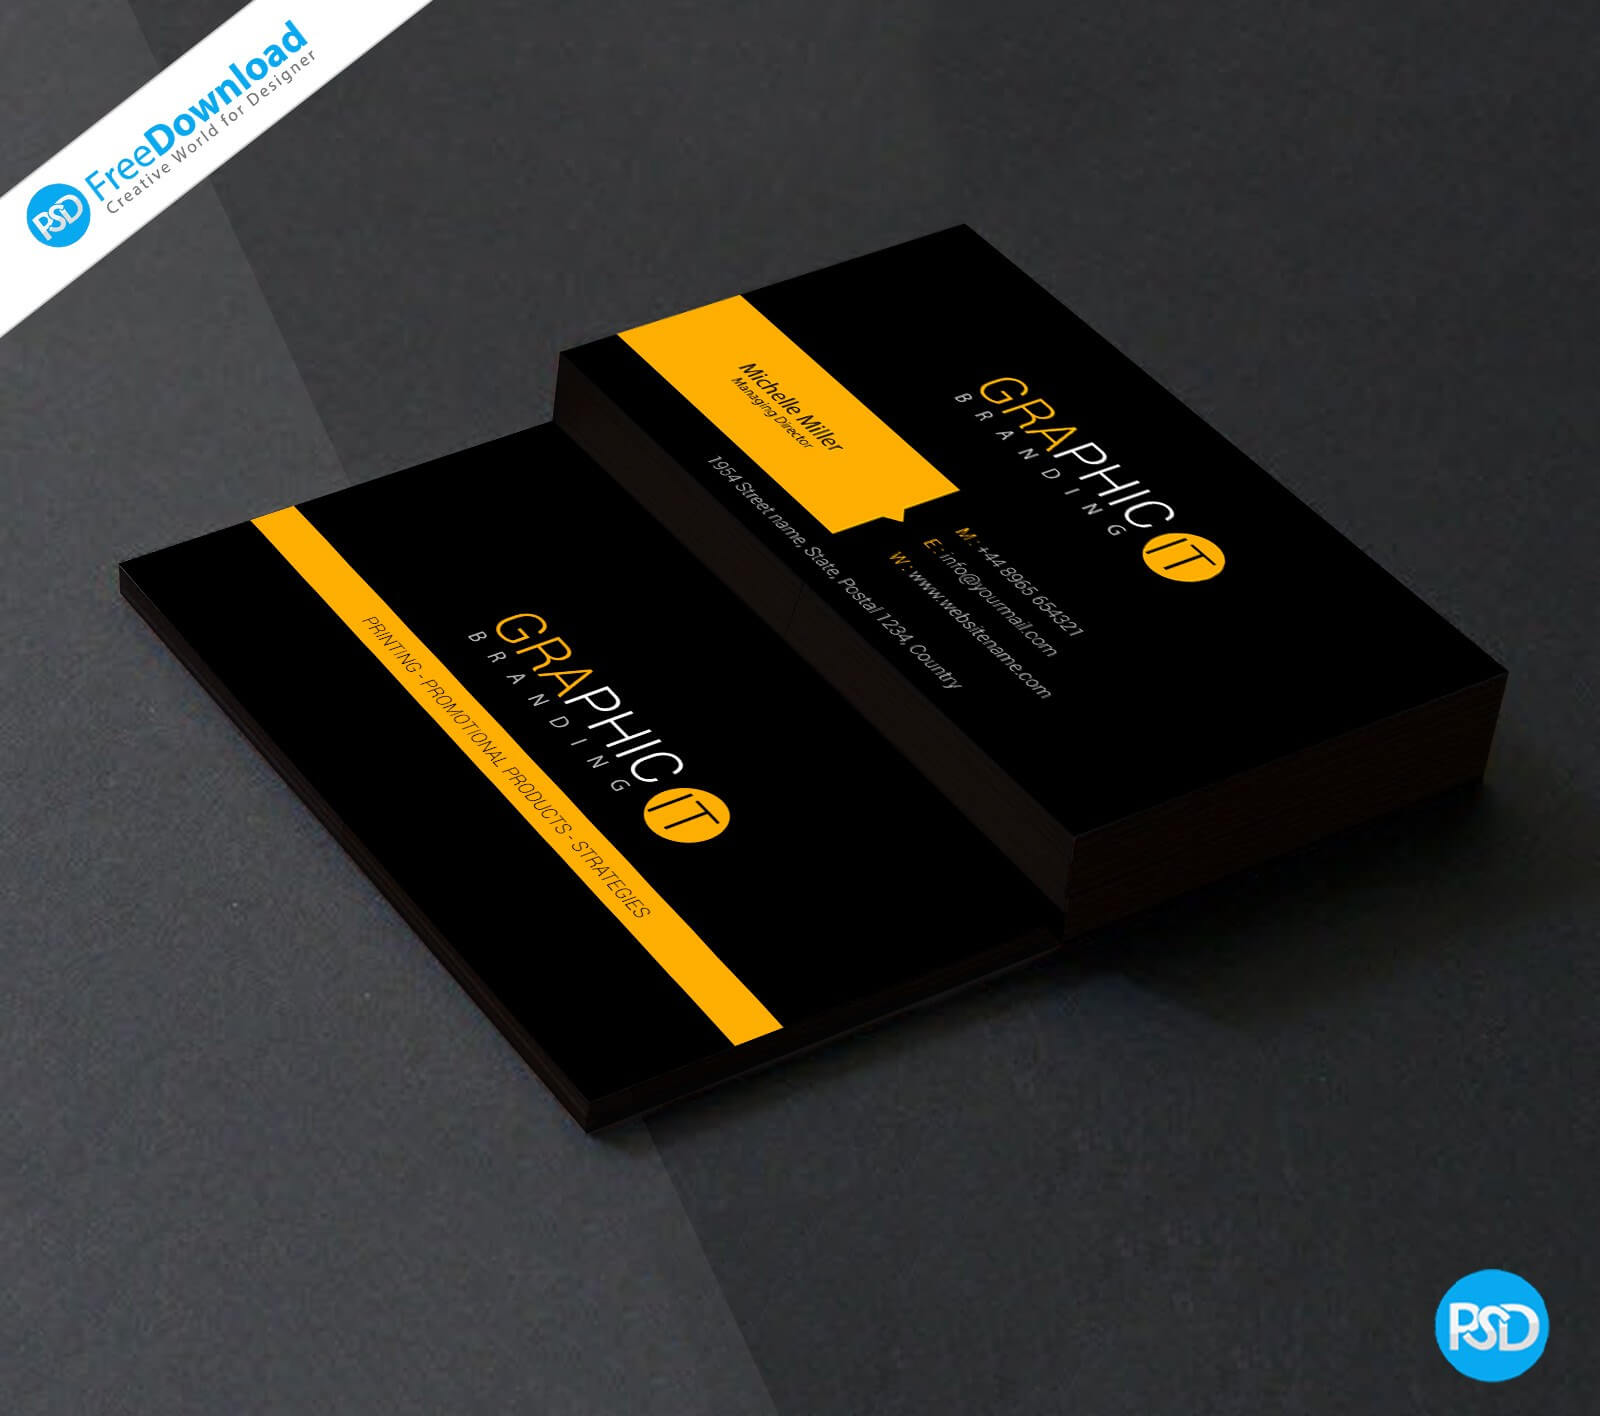 010 Blank Business Card Template Photoshop Free Download Throughout Photoshop Name Card Template